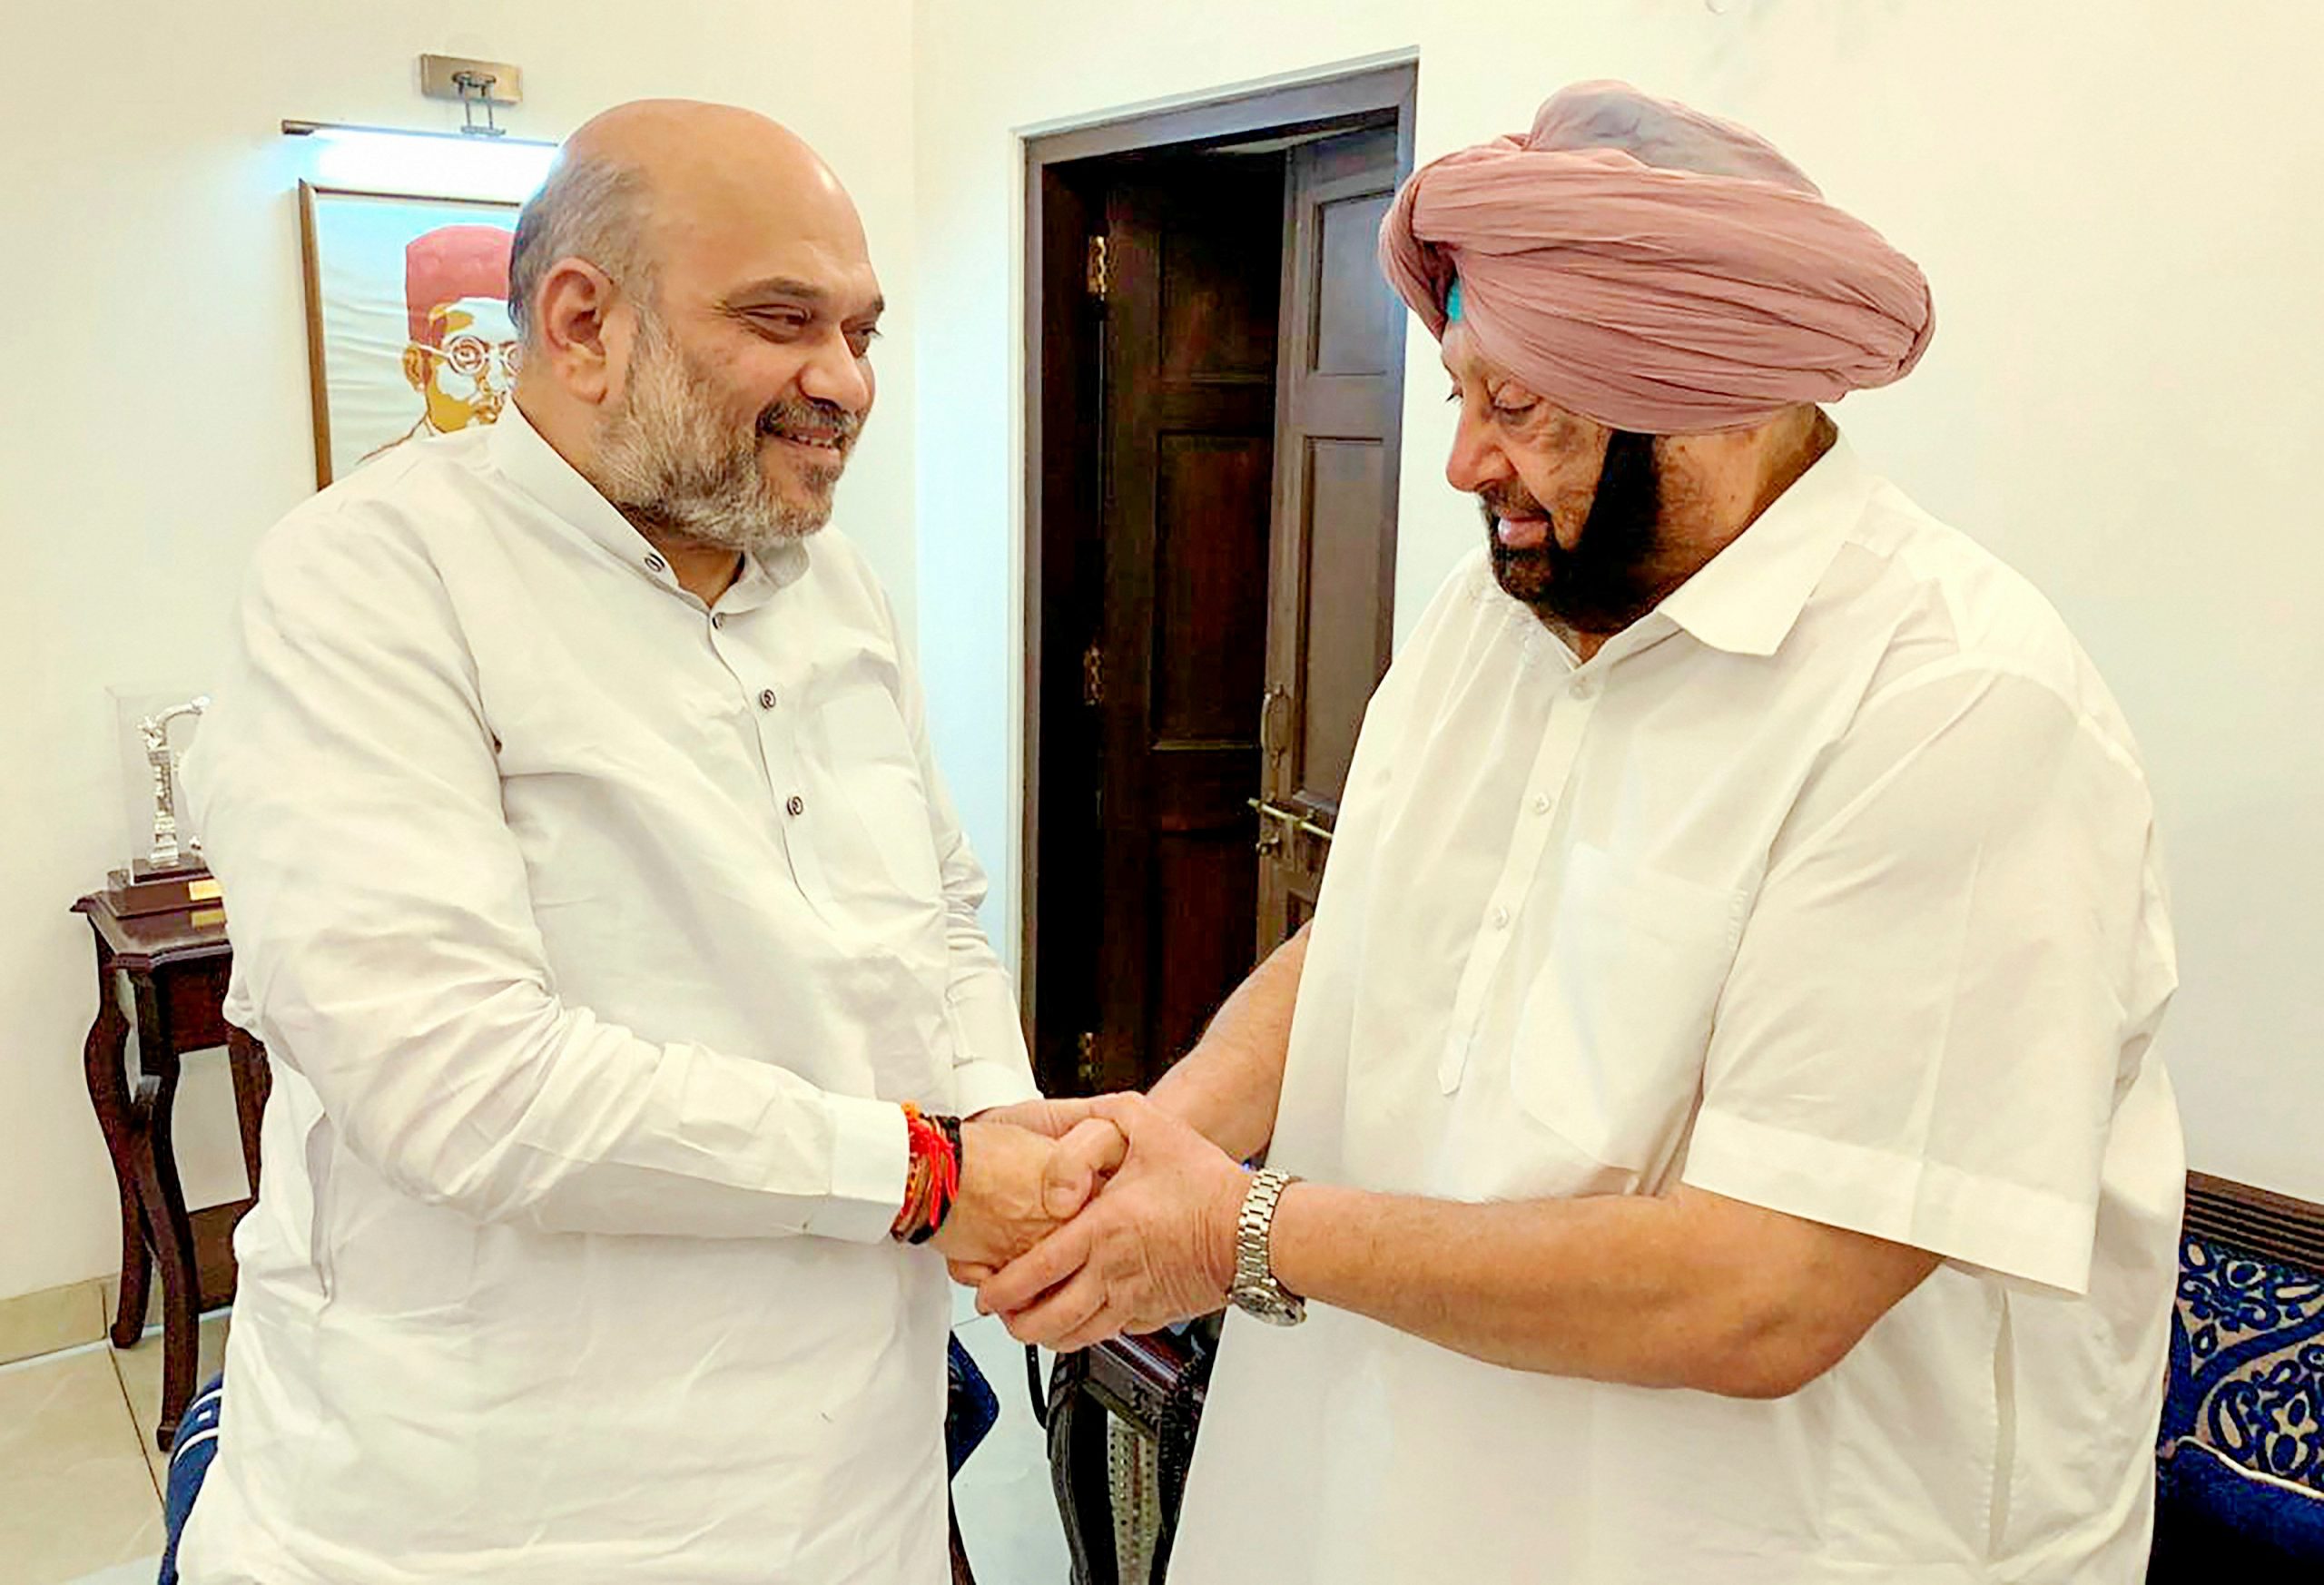 Amarinder Singh announces political party, open to tie-up with BJP